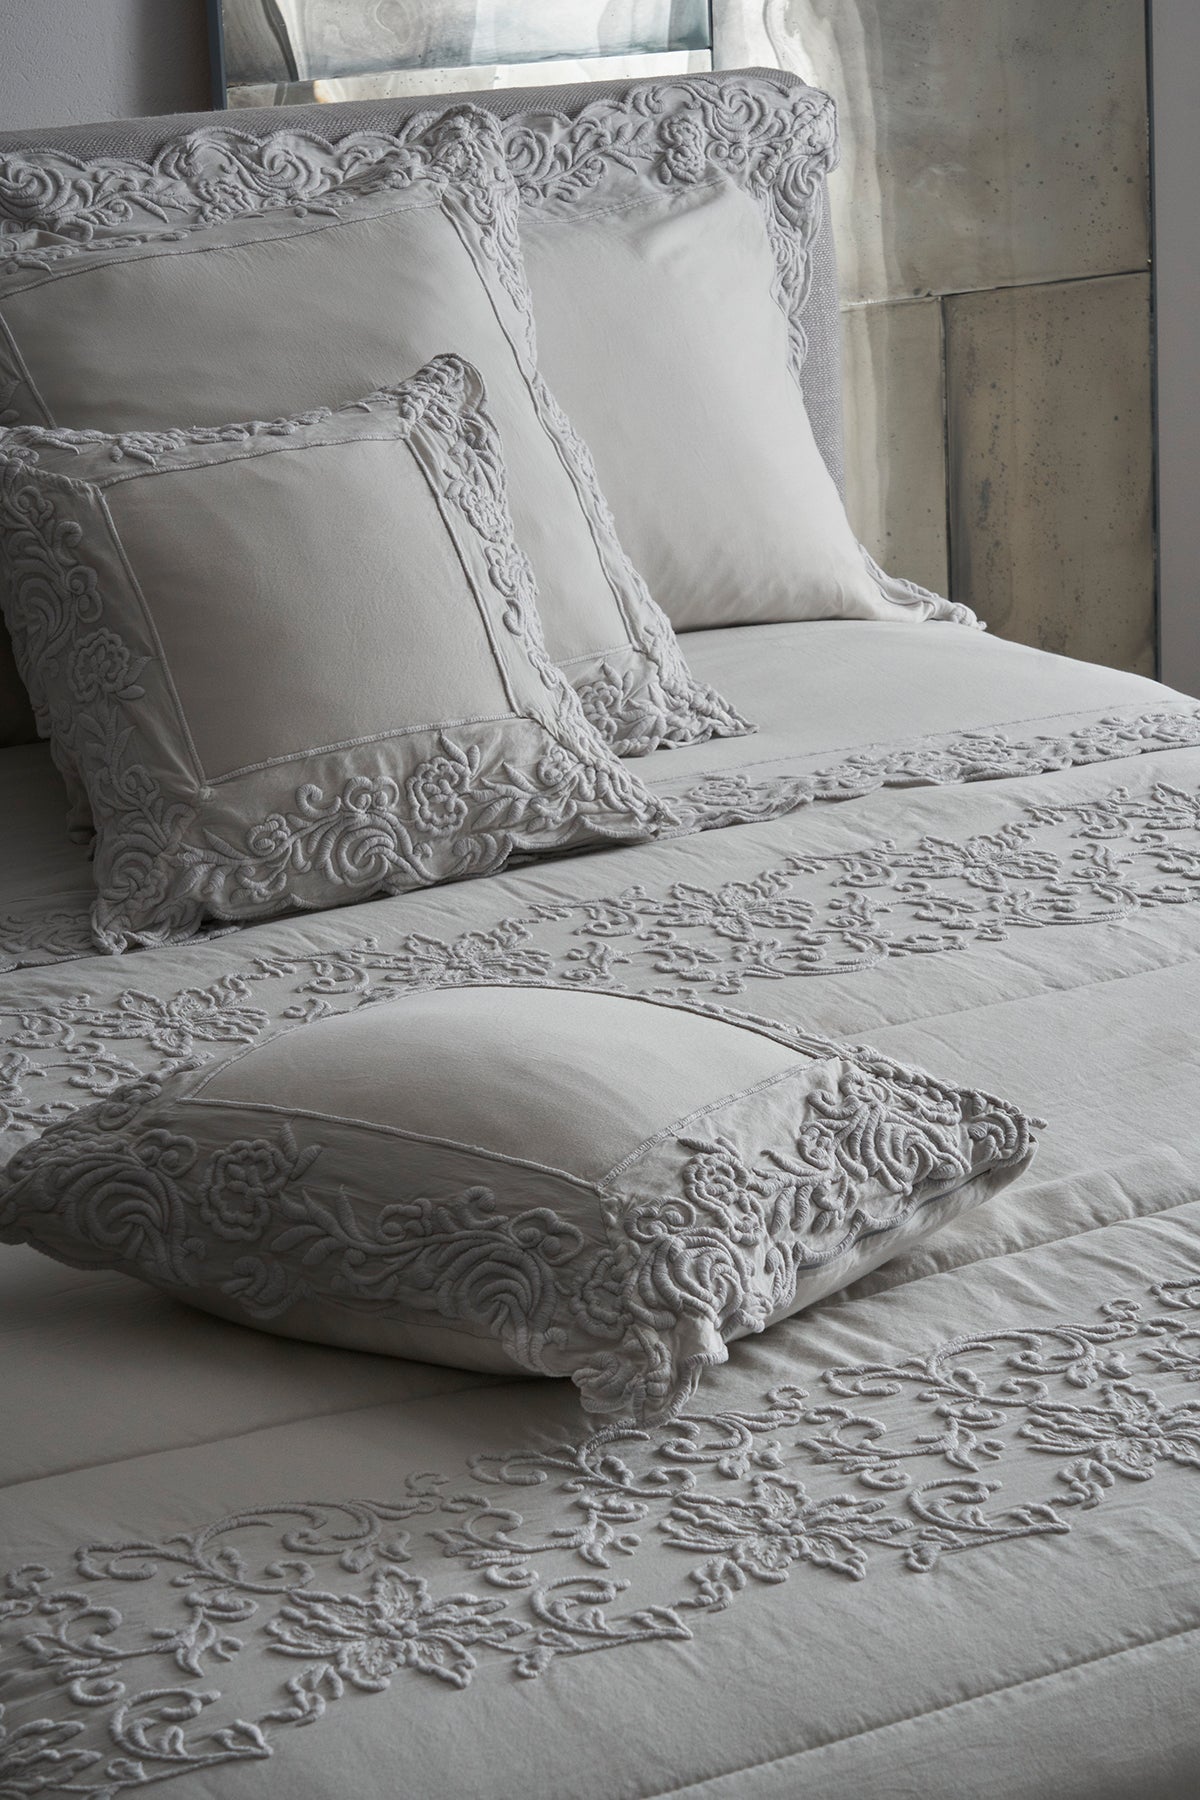 Quilted bedspread and quilt Dune Merveille due fasce